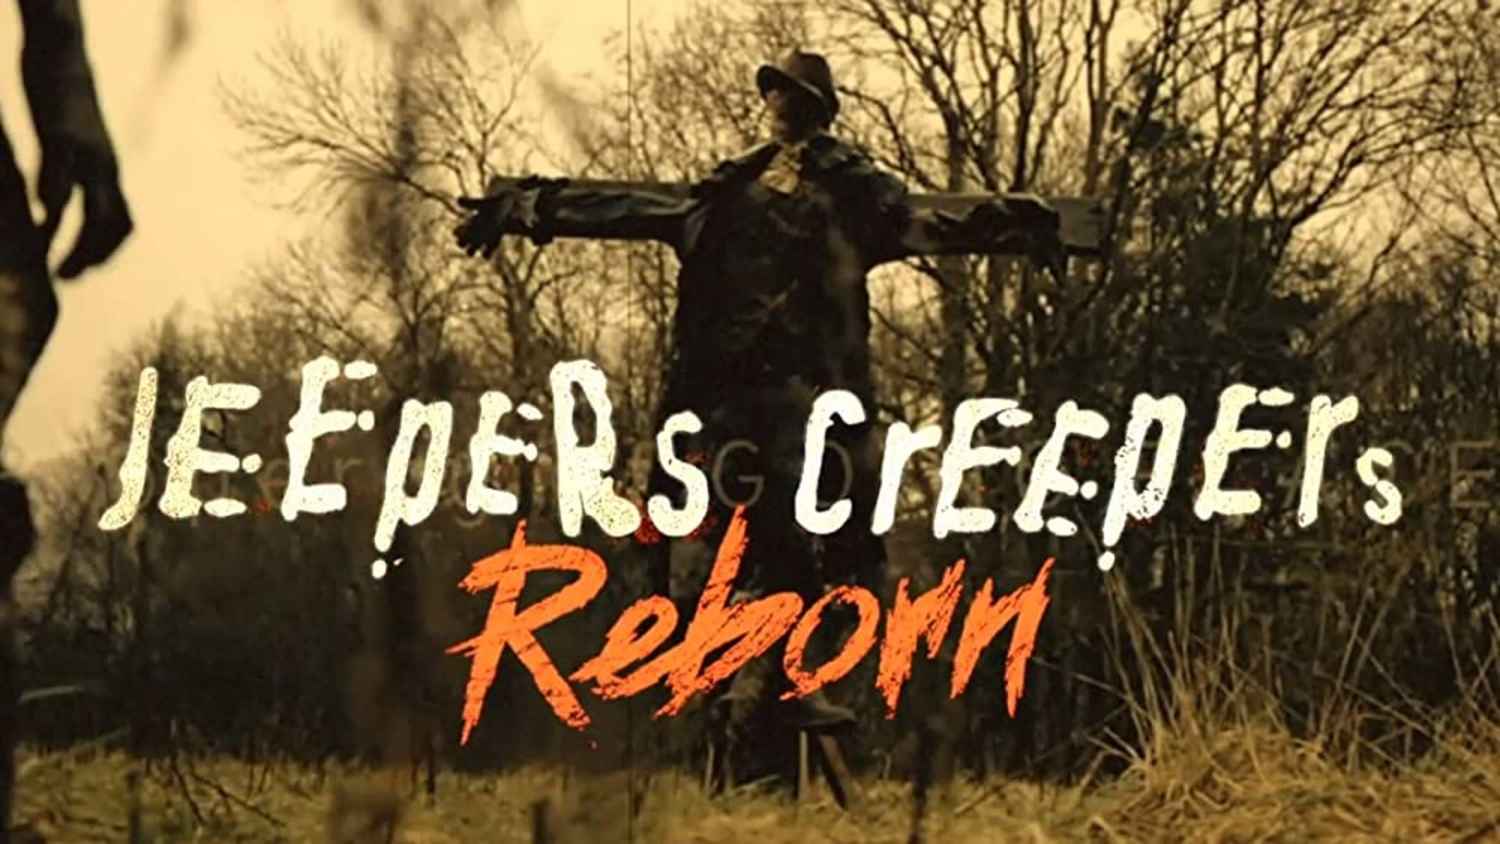 jeepers creepers free to watch online